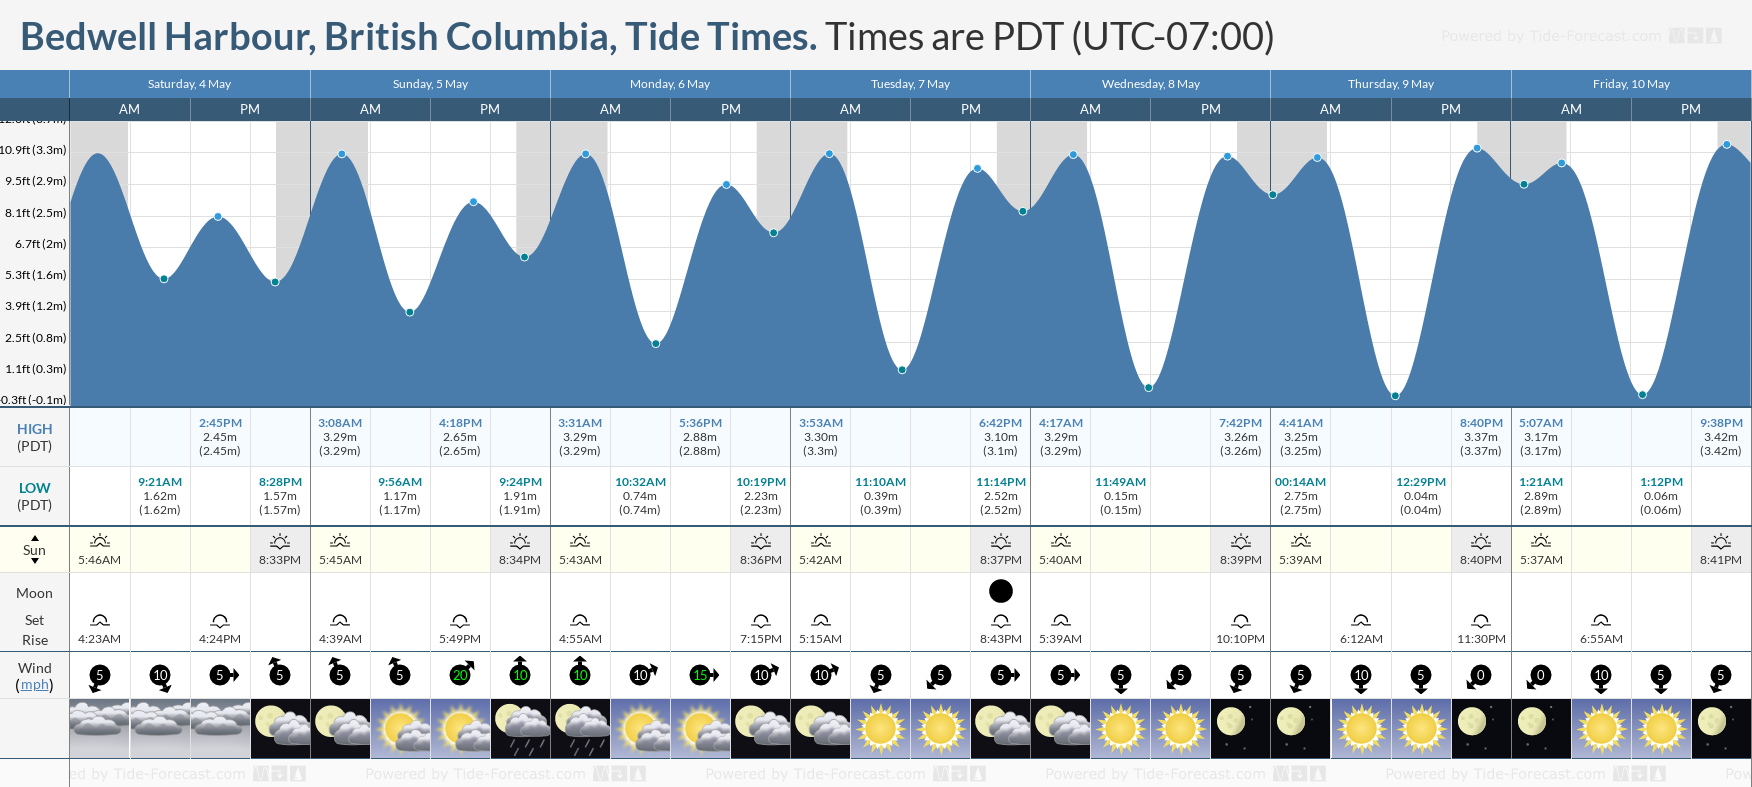 Bedwell Harbour, British Columbia Tide Chart including high and low tide tide times for the next 7 days